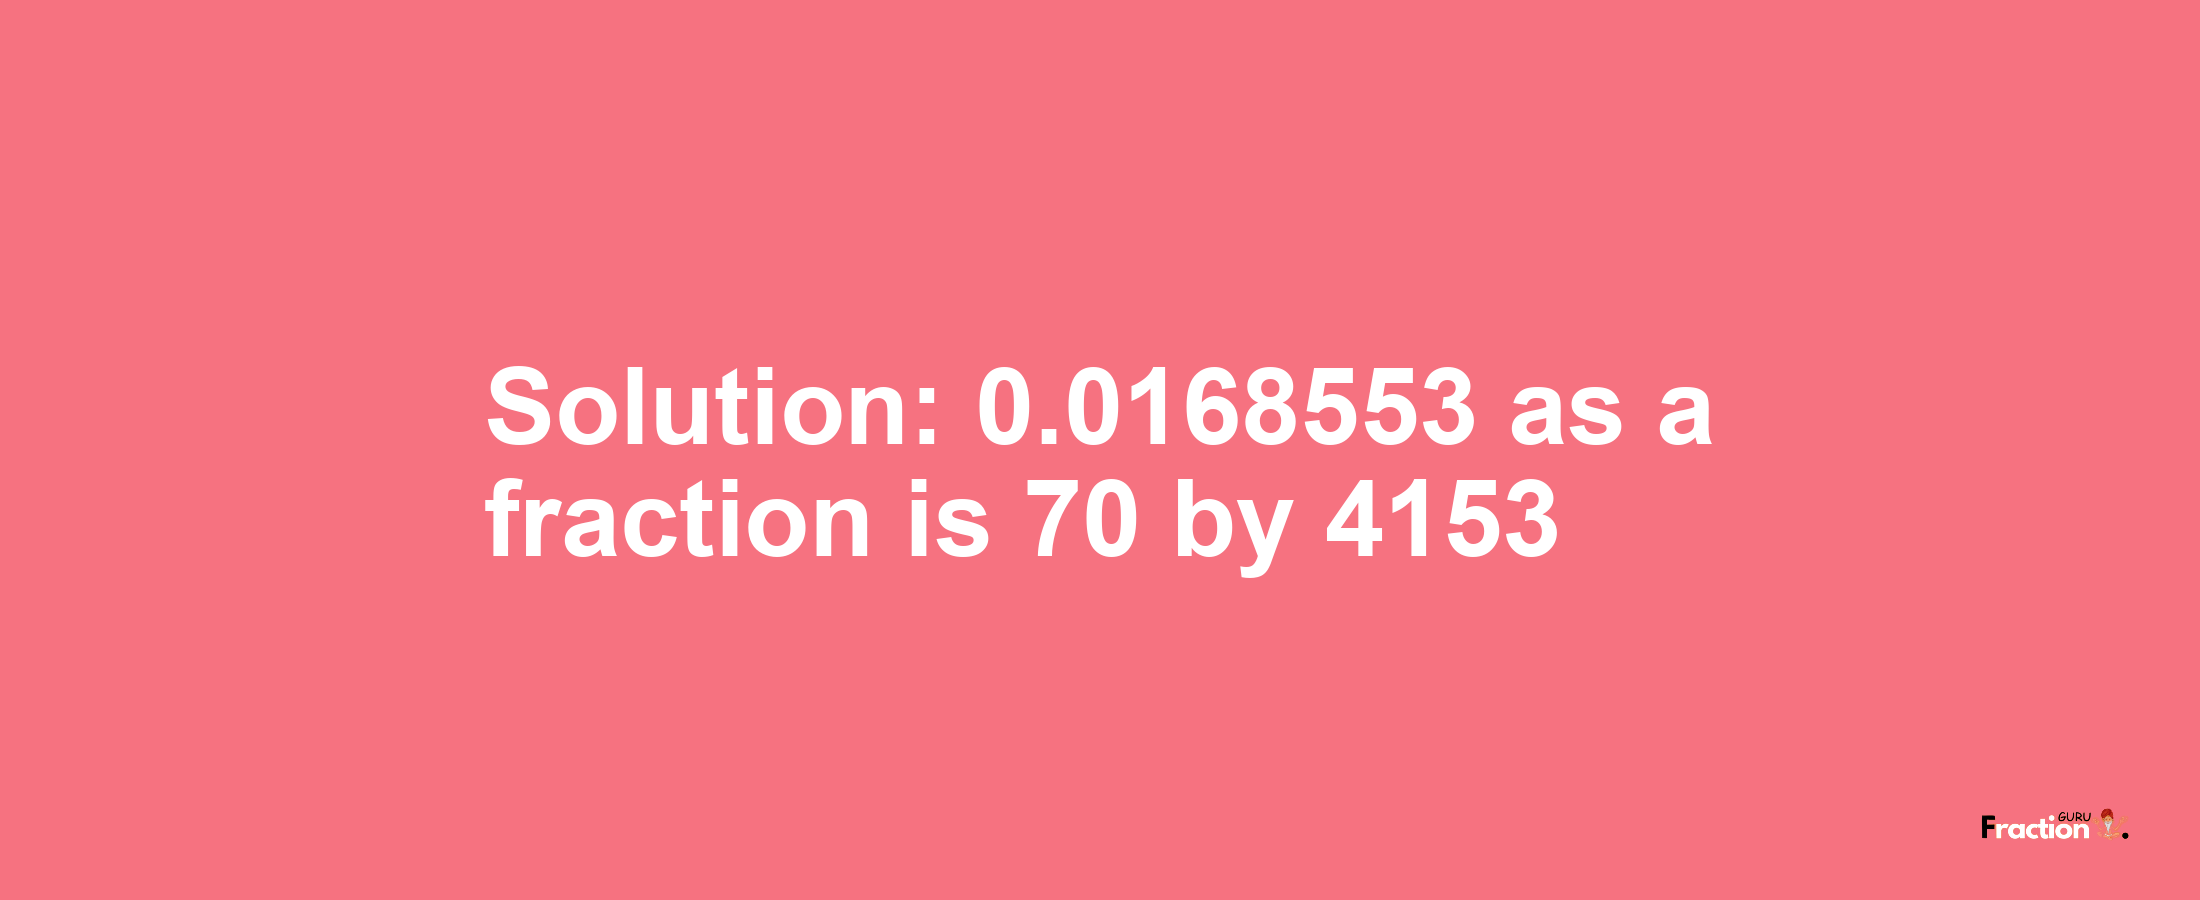 Solution:0.0168553 as a fraction is 70/4153